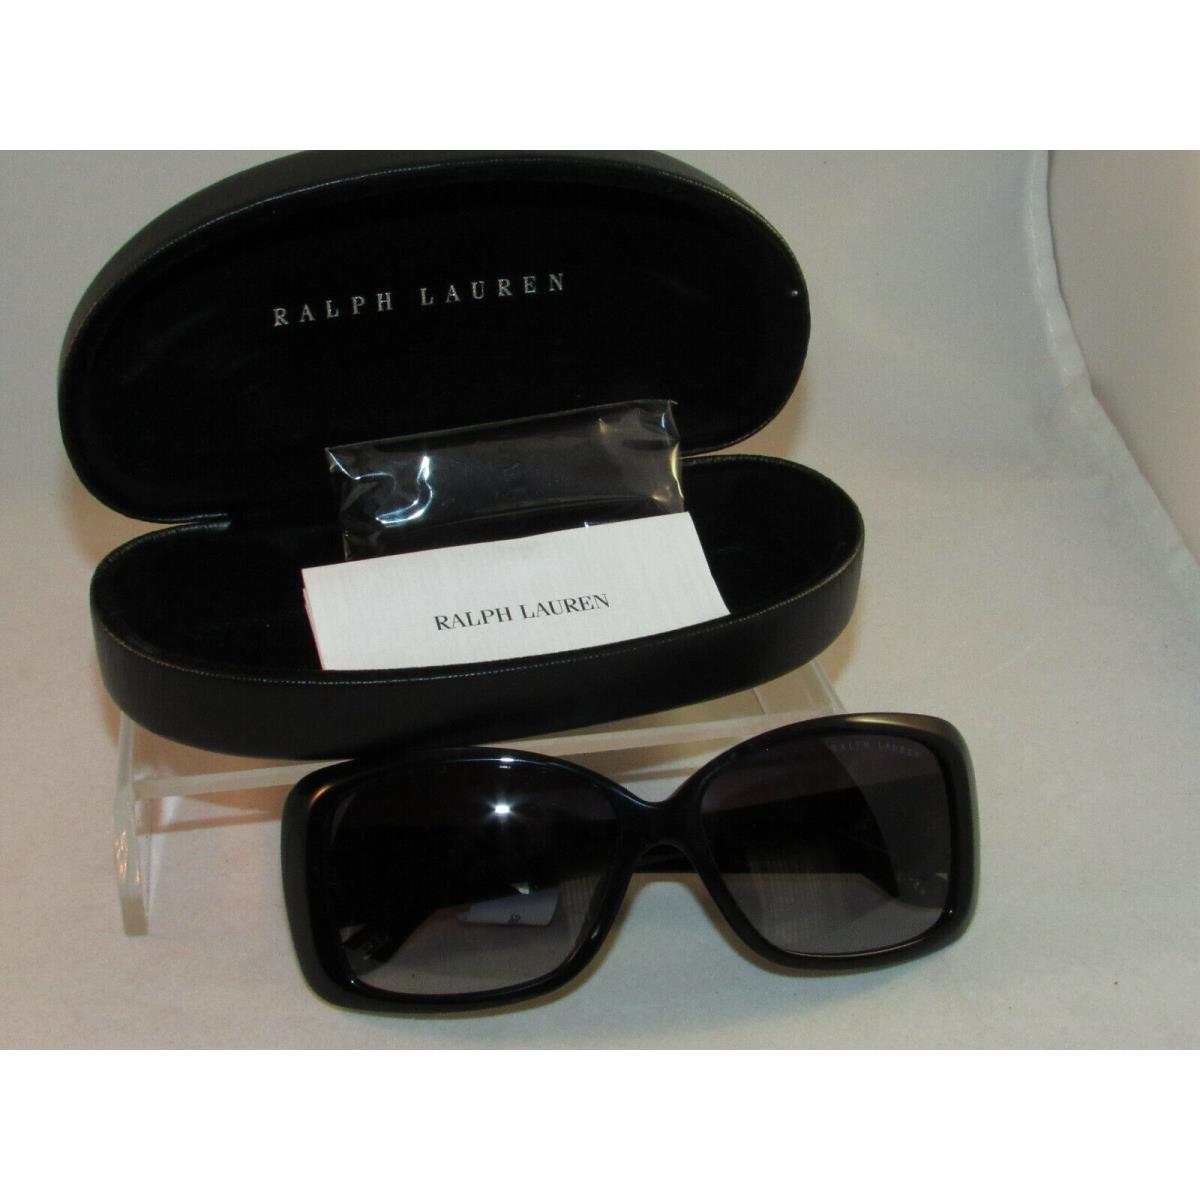 Ralph Lauren Sunglasses Hard Clam Shell Leather Case Unused Cleaning Cloth